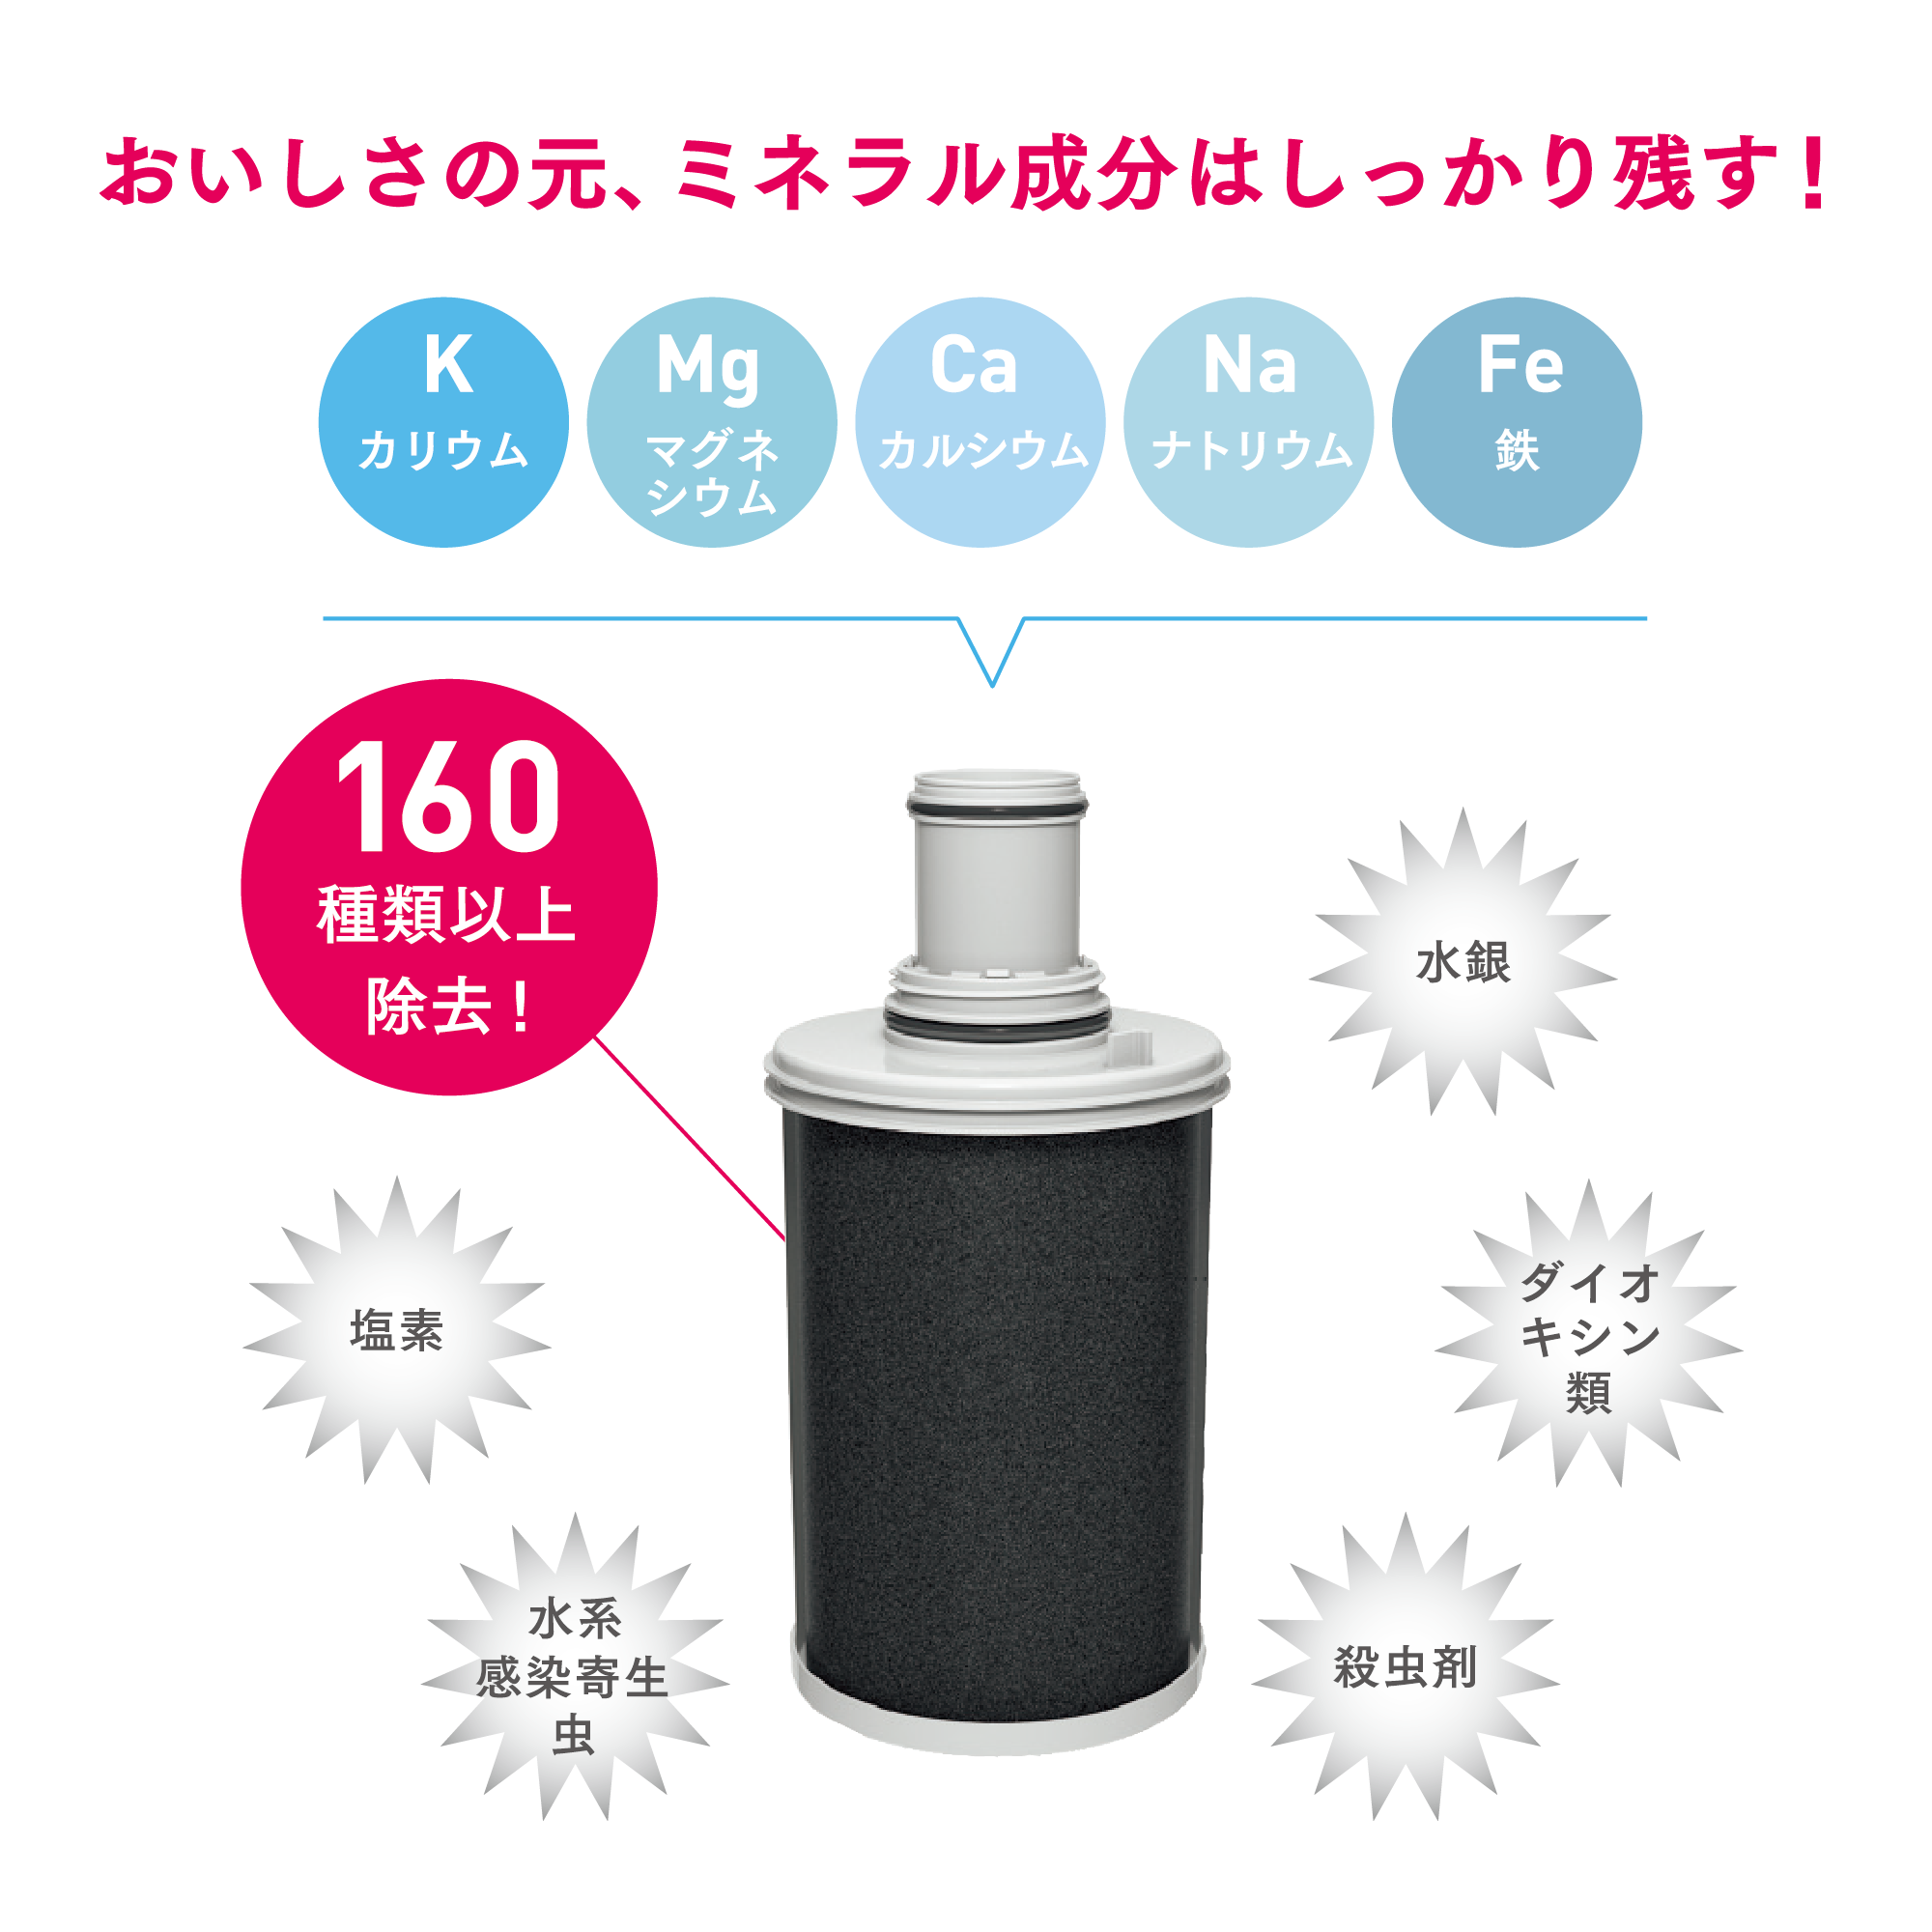 Amway espring 2  浄水機　カートリッジ